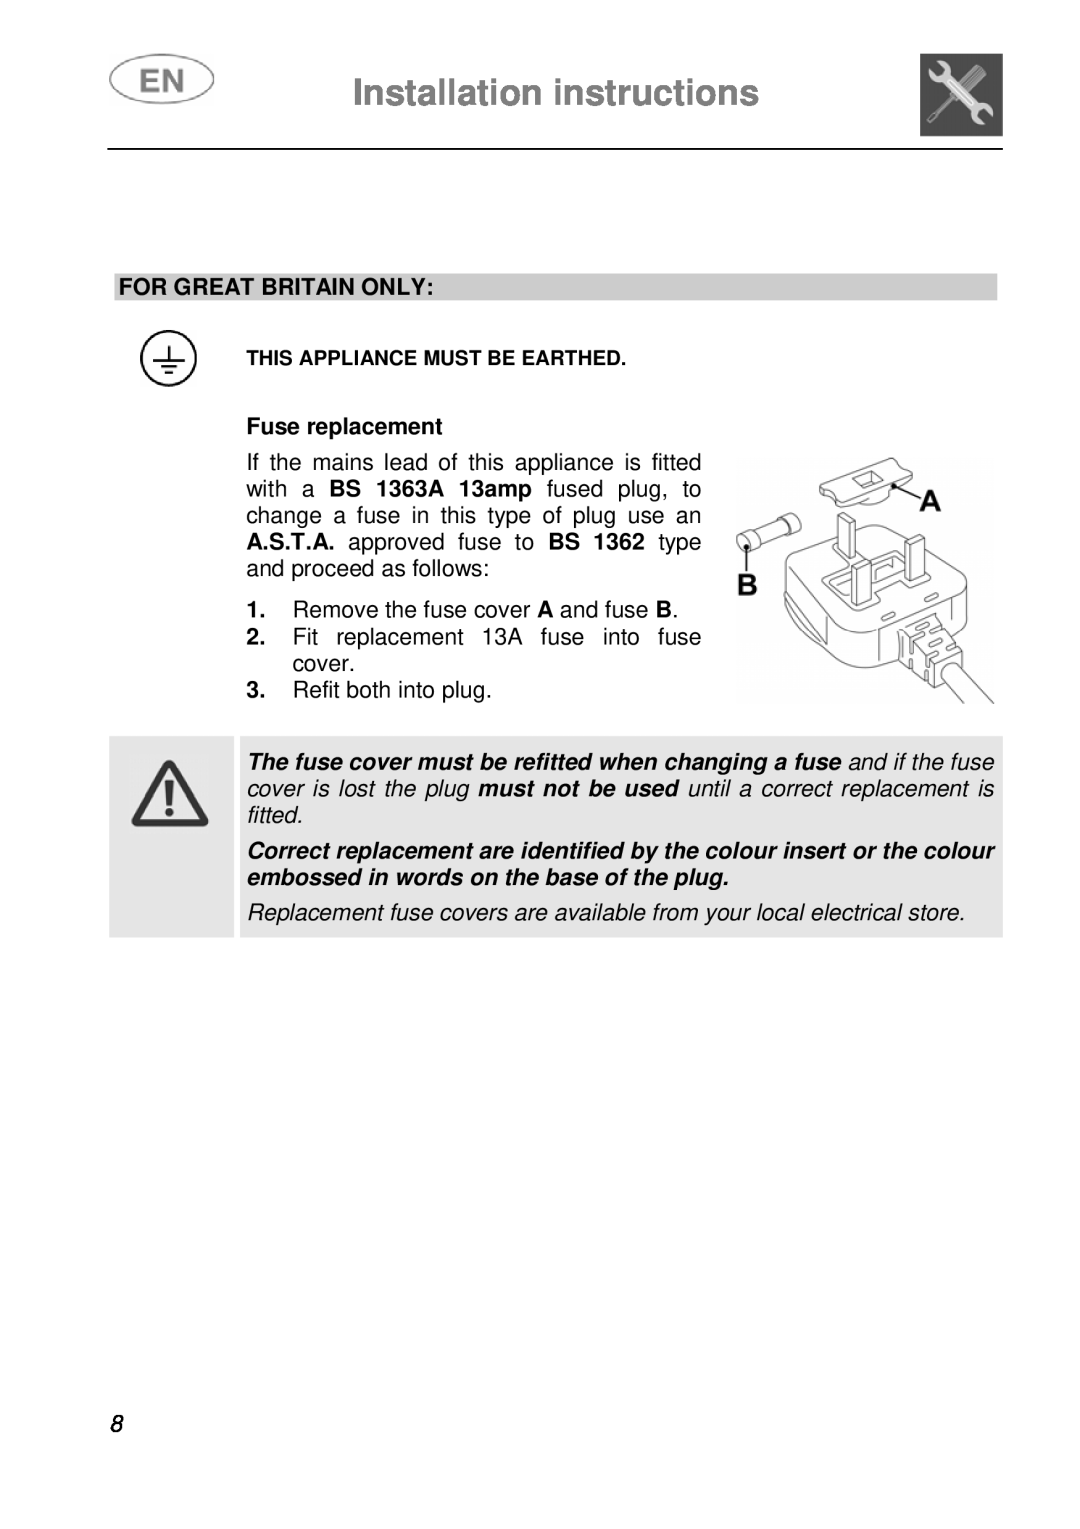 Smeg ST115S instruction manual Installation instructions, For Great Britain Only, Fuse replacement 